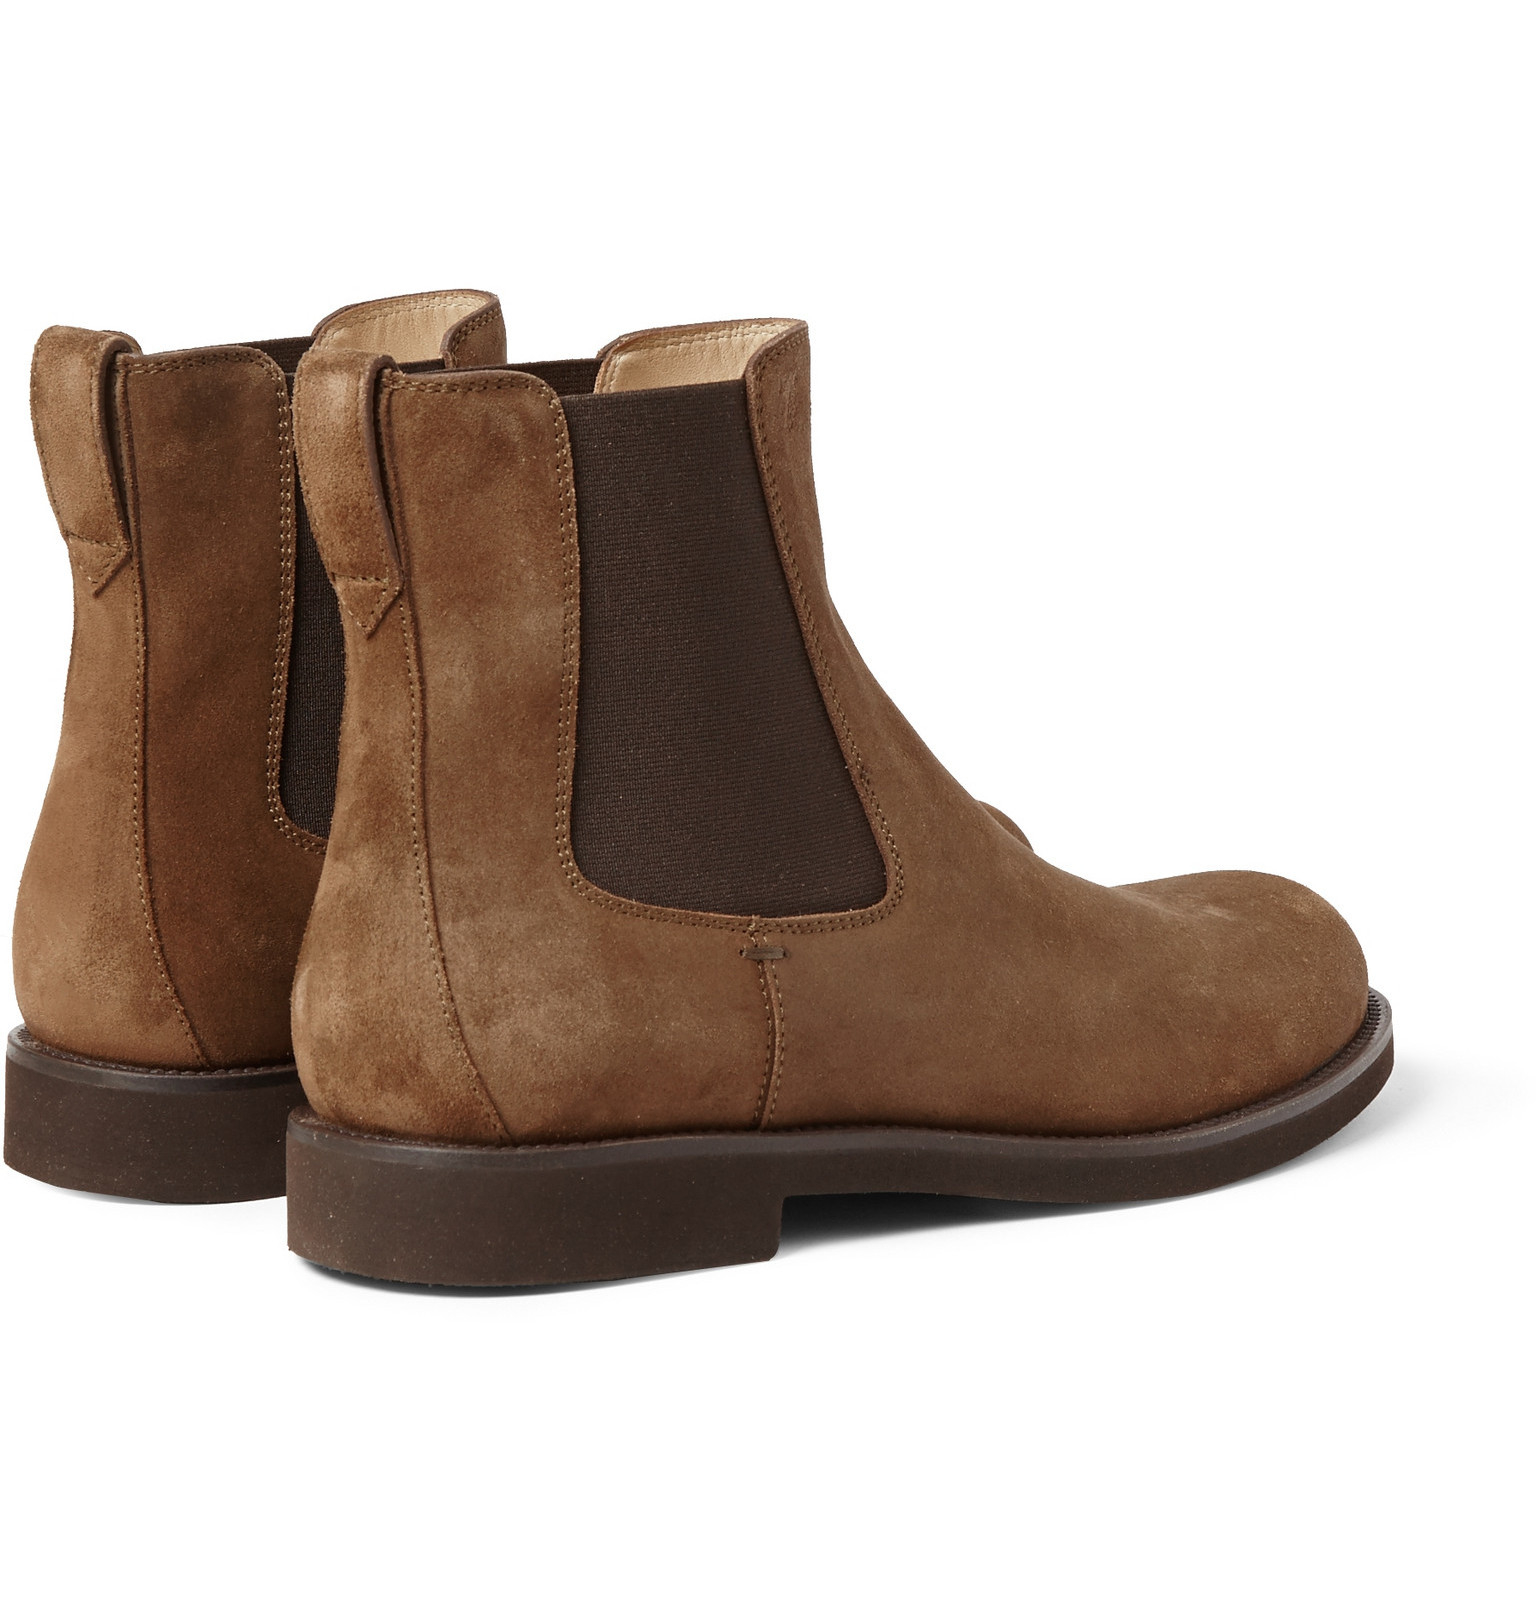 Tod's Rubber-soled Suede Chelsea Boots in Brown for Men - Lyst